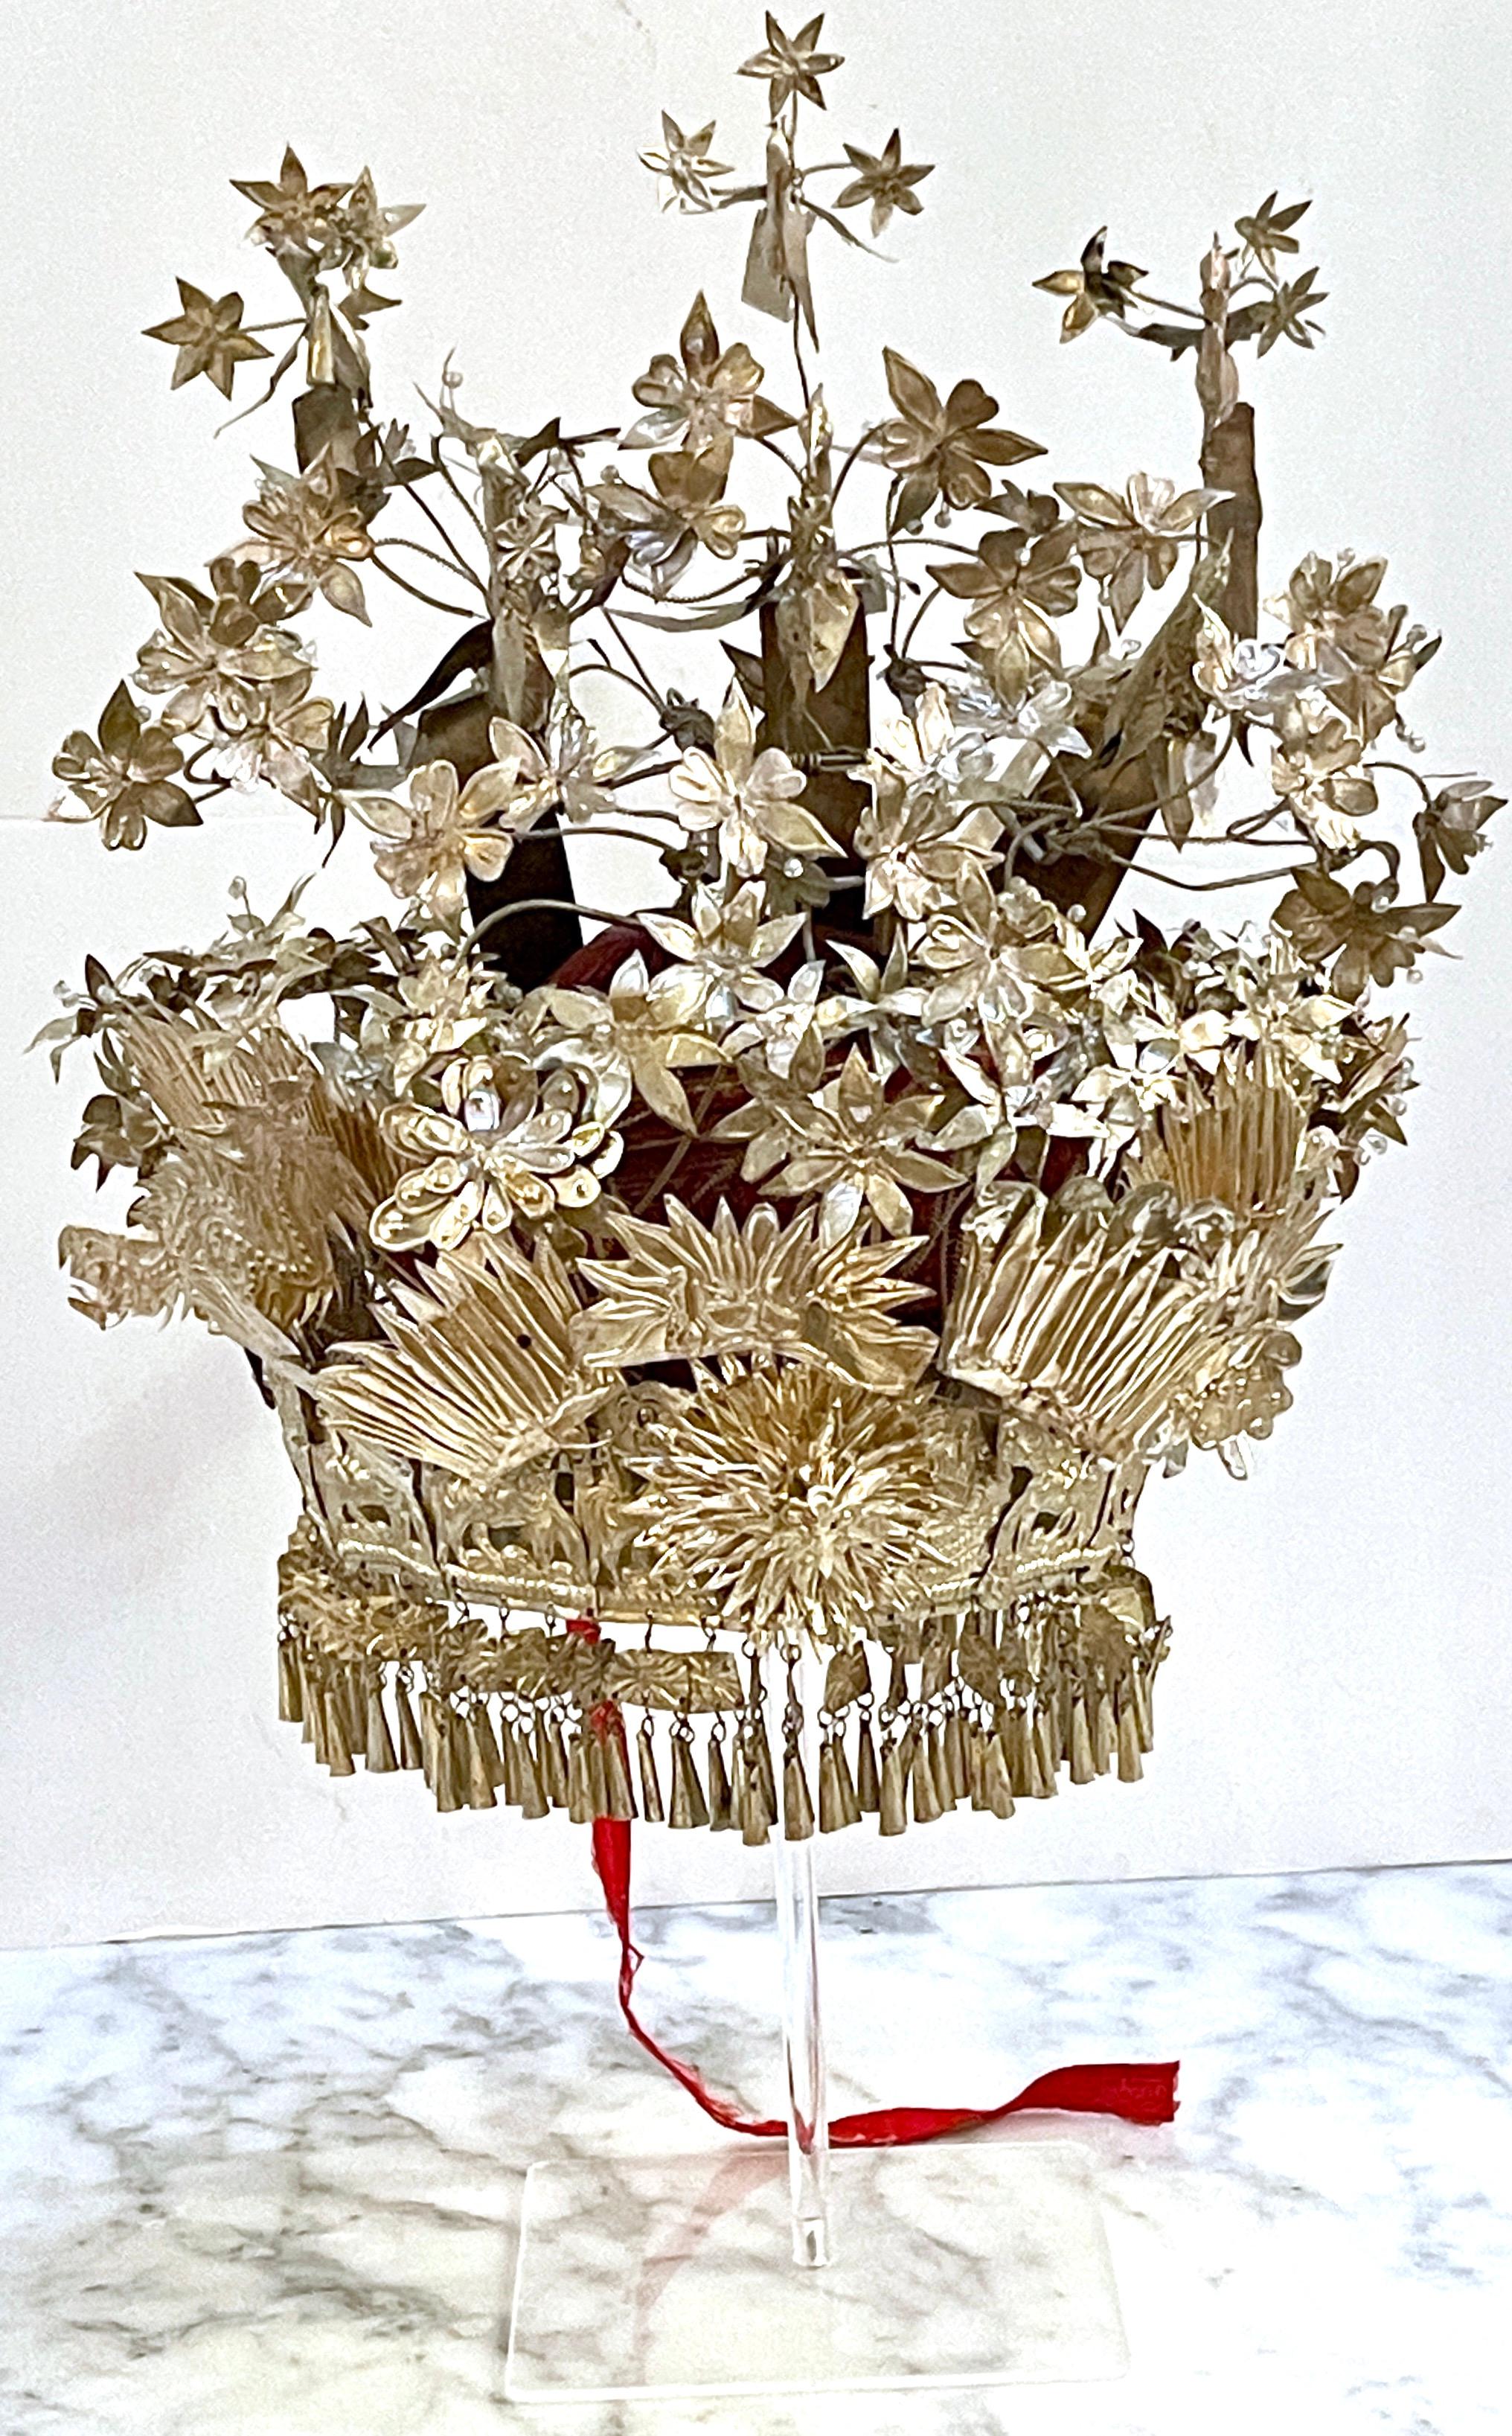 Chinese Silver & Leather Theatre Opera / Wedding Tiered Phoenix Headdress, 1920s
Silvered Metal & leather and embroidered Mandarin hat 

This Chinese silver & leather theatre opera/wedding tiered phoenix headdress, originating from the 1920s, is a